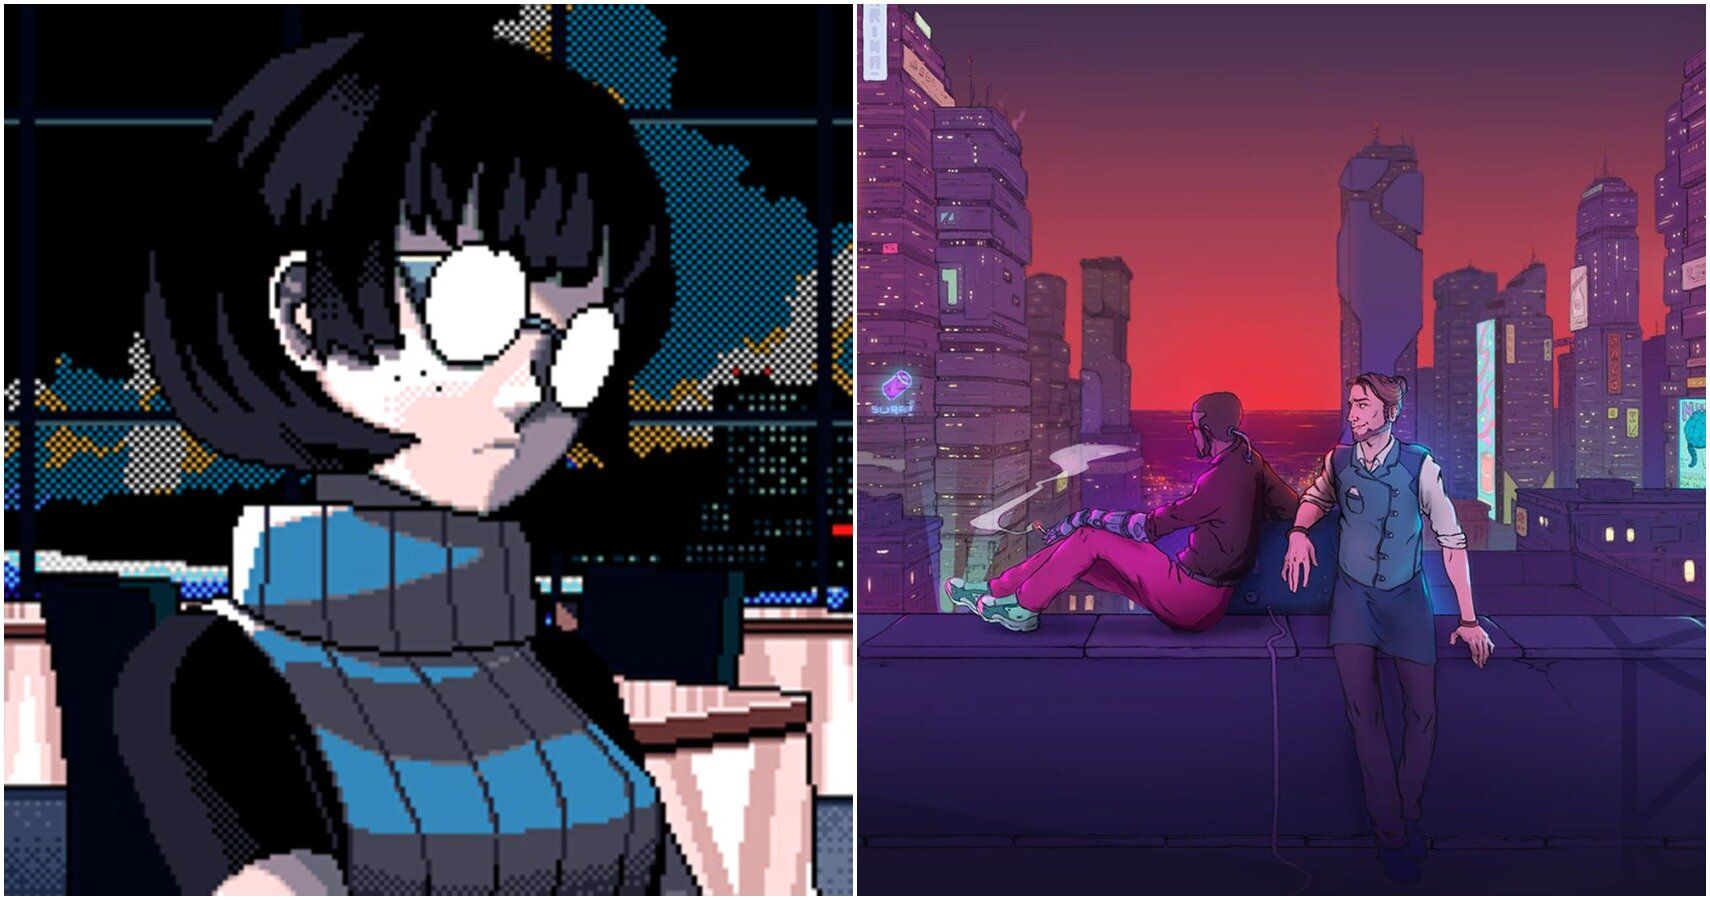 split image of girl in classes and men looking at cyberpunk city